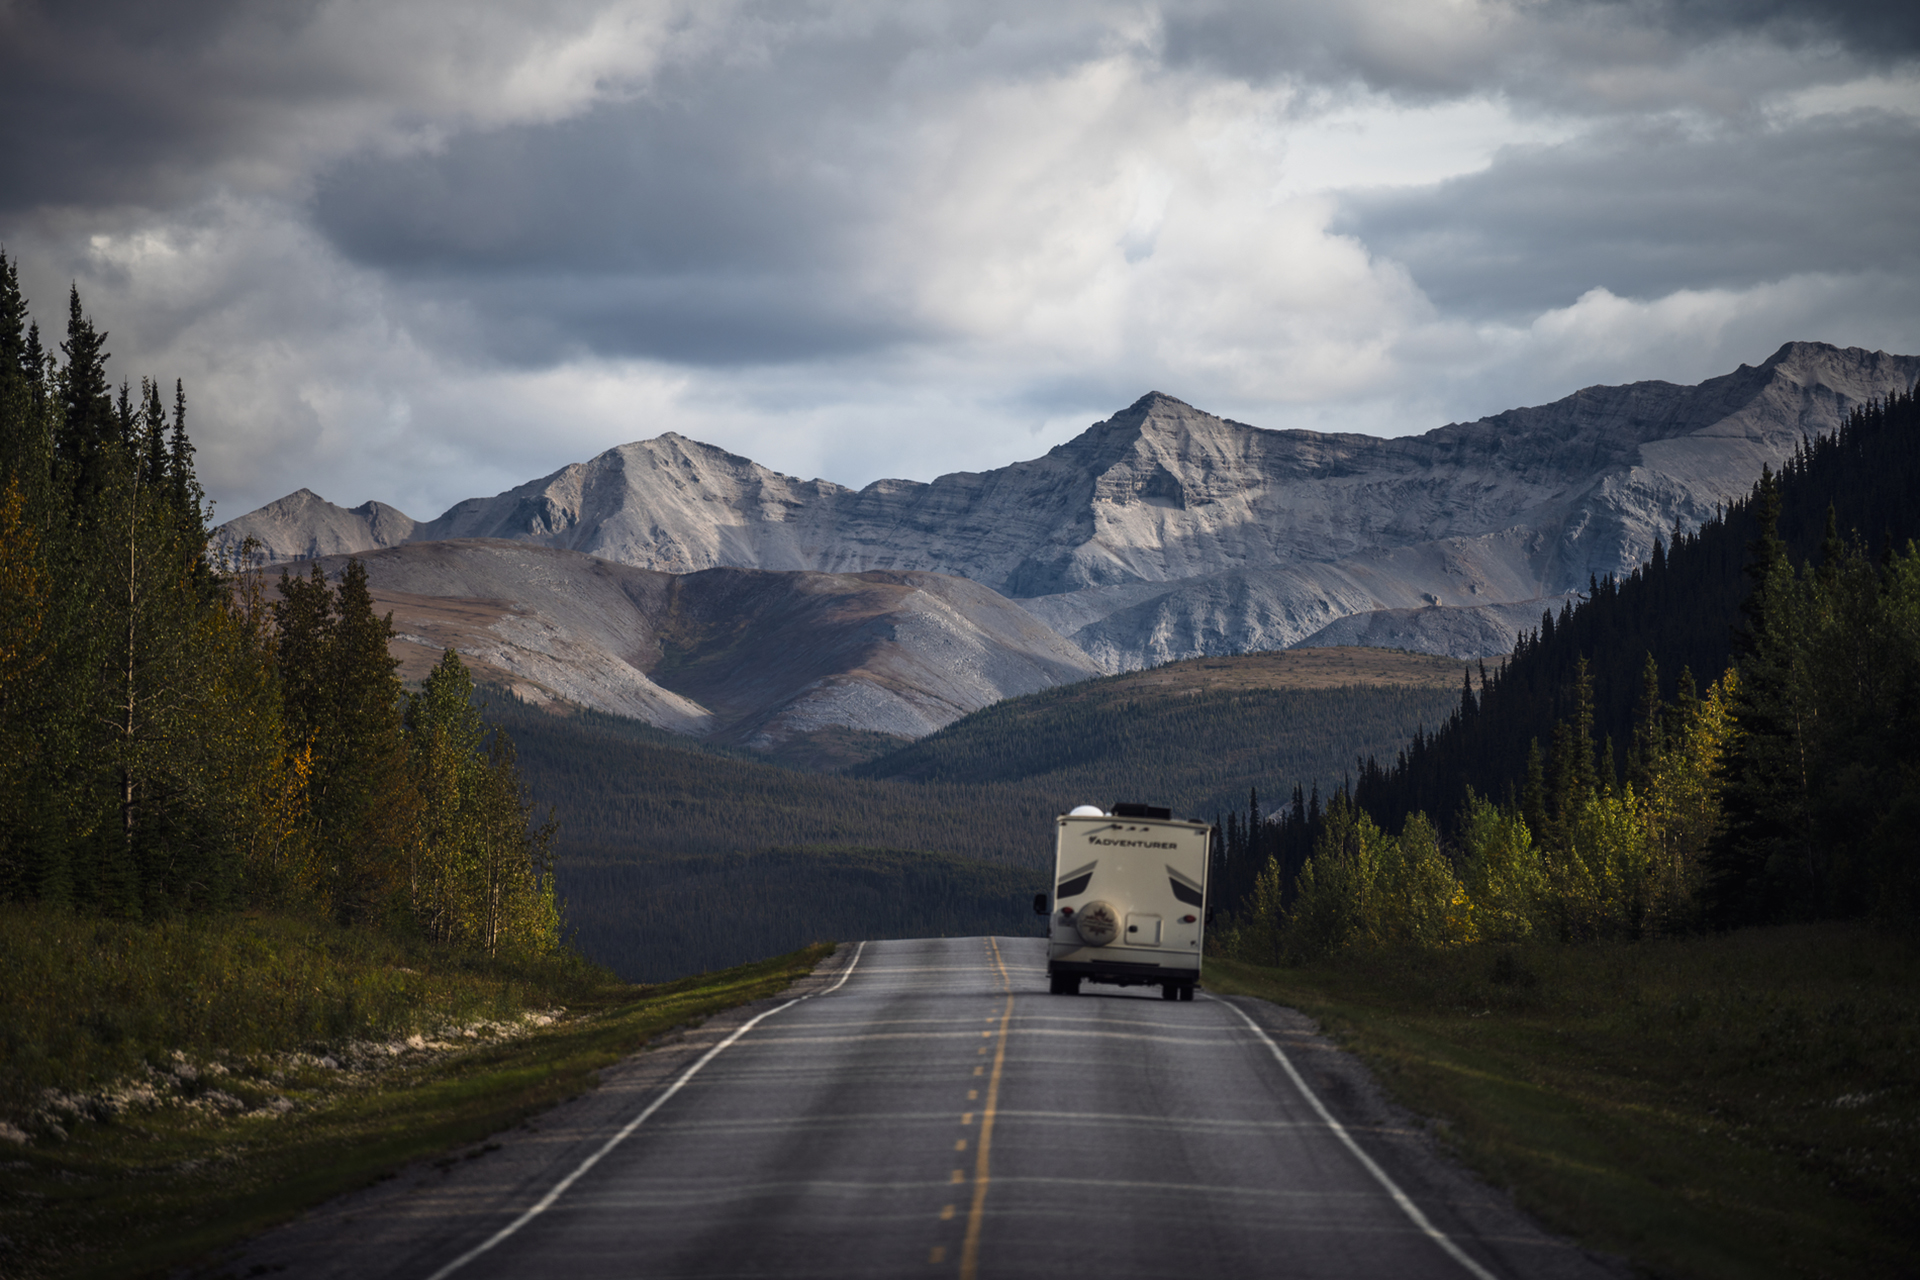 An RV drives down a quiet highway towards a mountain range in the distance. Words on the back of the RV read, "Adventures."